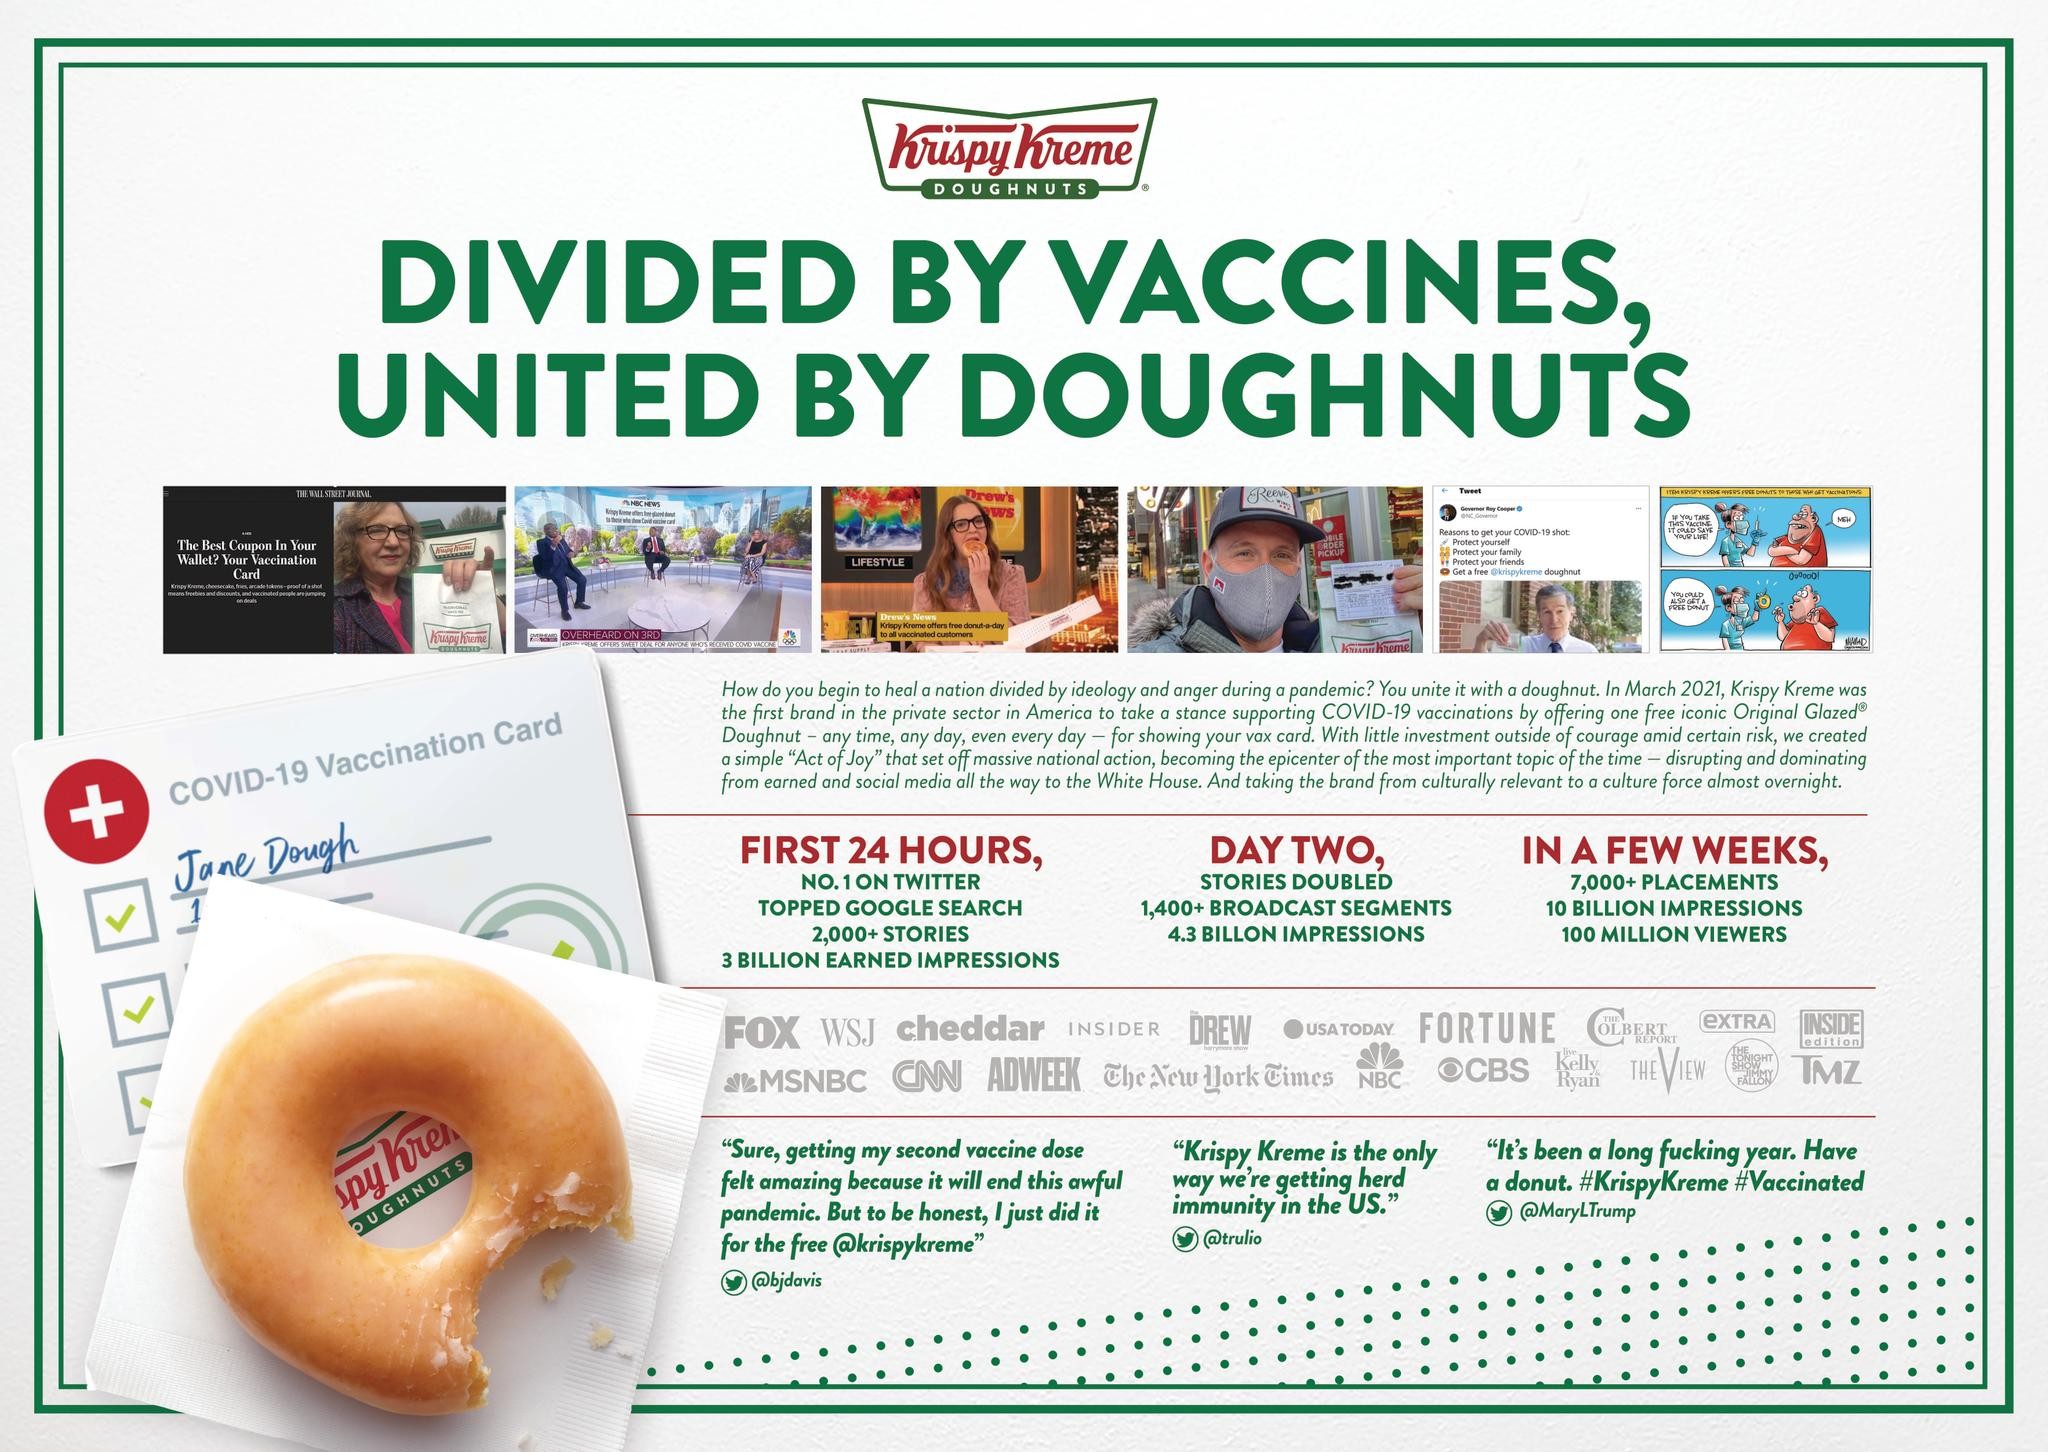 Krispy Kreme Shares Sweet Support for COVID-19 Vaccinations